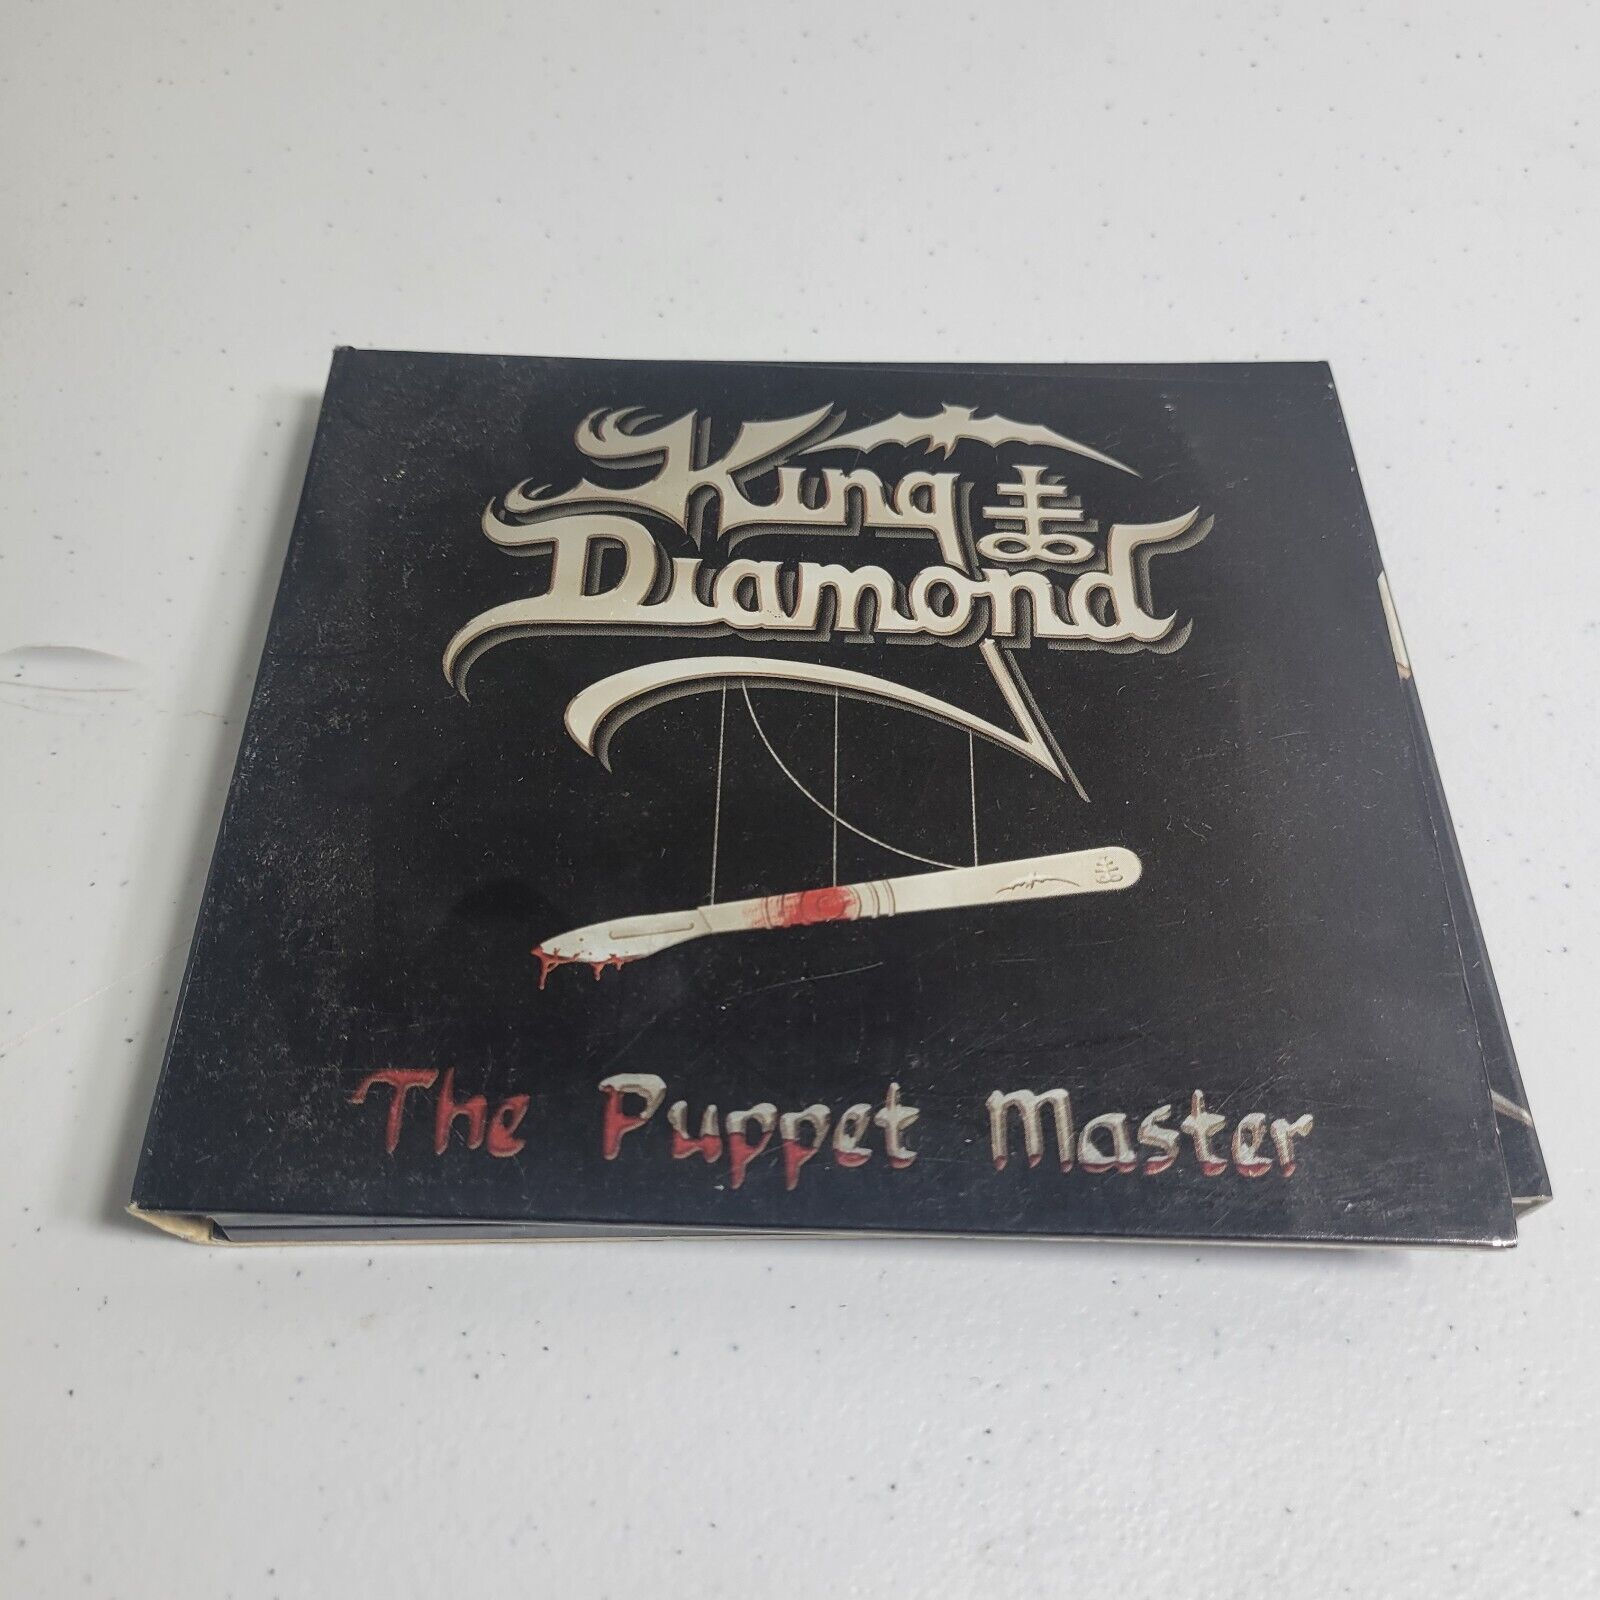 King Diamond-Puppet Master CD(2003, Metal Blade Records) FREE AND FAST SHIPPING!